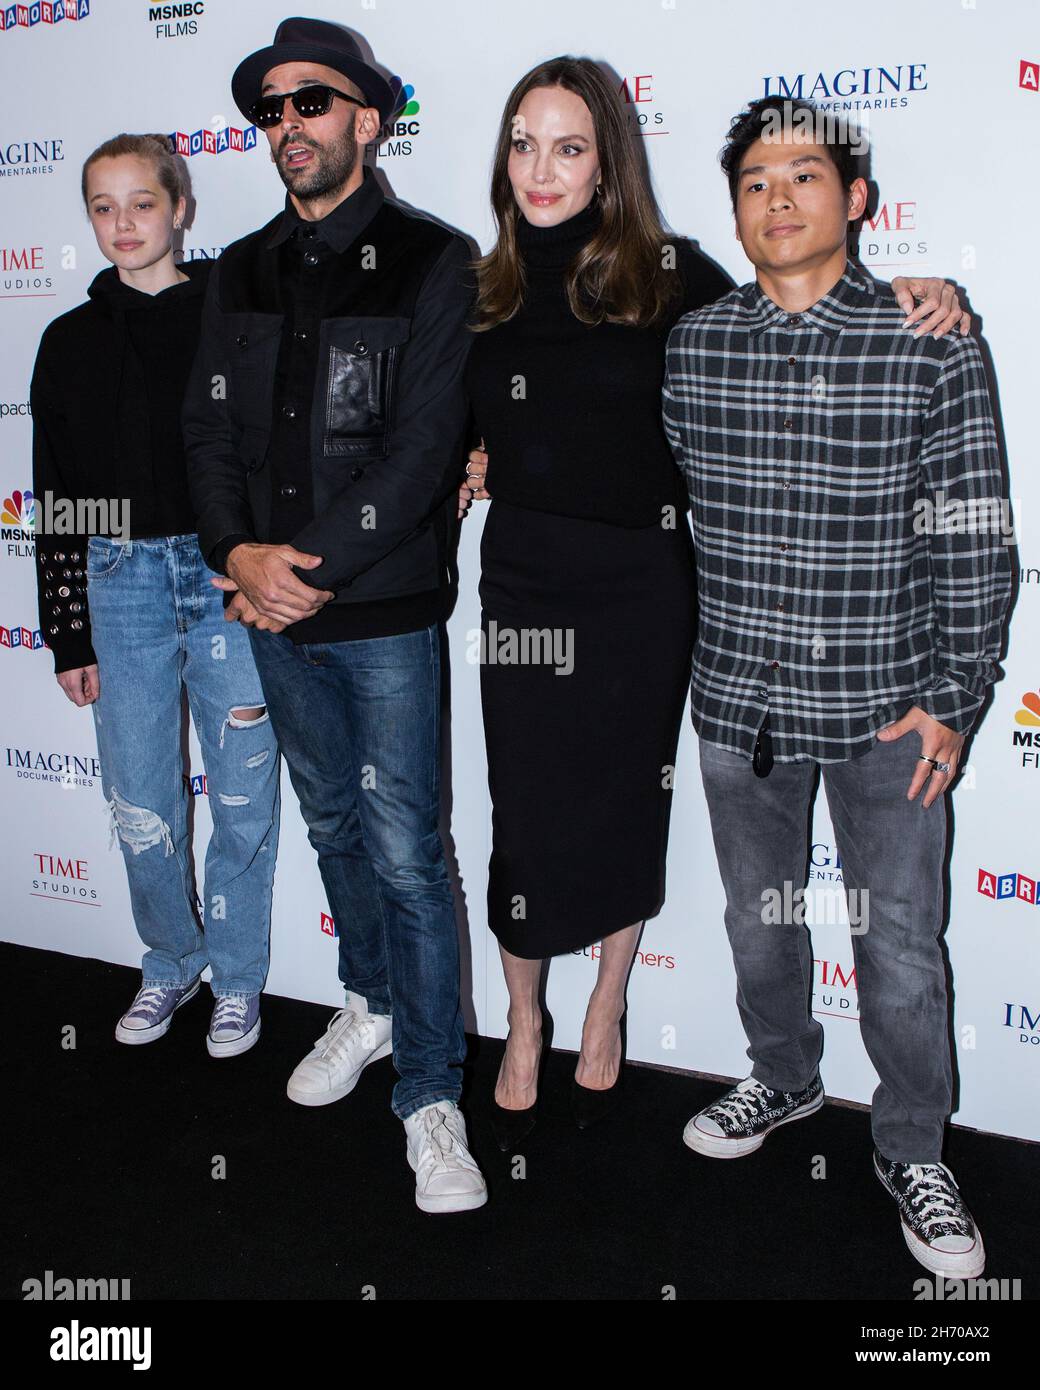 Los Angeles, United States. 18th Nov, 2021. LOS ANGELES, CALIFORNIA, USA - NOVEMBER 18: Shiloh Jolie-Pitt, street artist JR, actress Angelina Jolie and Pax Thien Jolie-Pitt arrive at the Los Angeles Premiere Of MSNBC Films' 'Paper & Glue: A JR Project' held at the Museum Of Tolerance on November 18, 2021 in Los Angeles, California, United States. (Photo by Rudy Torres/Image Press Agency/Sipa USA) Credit: Sipa USA/Alamy Live News Stock Photo